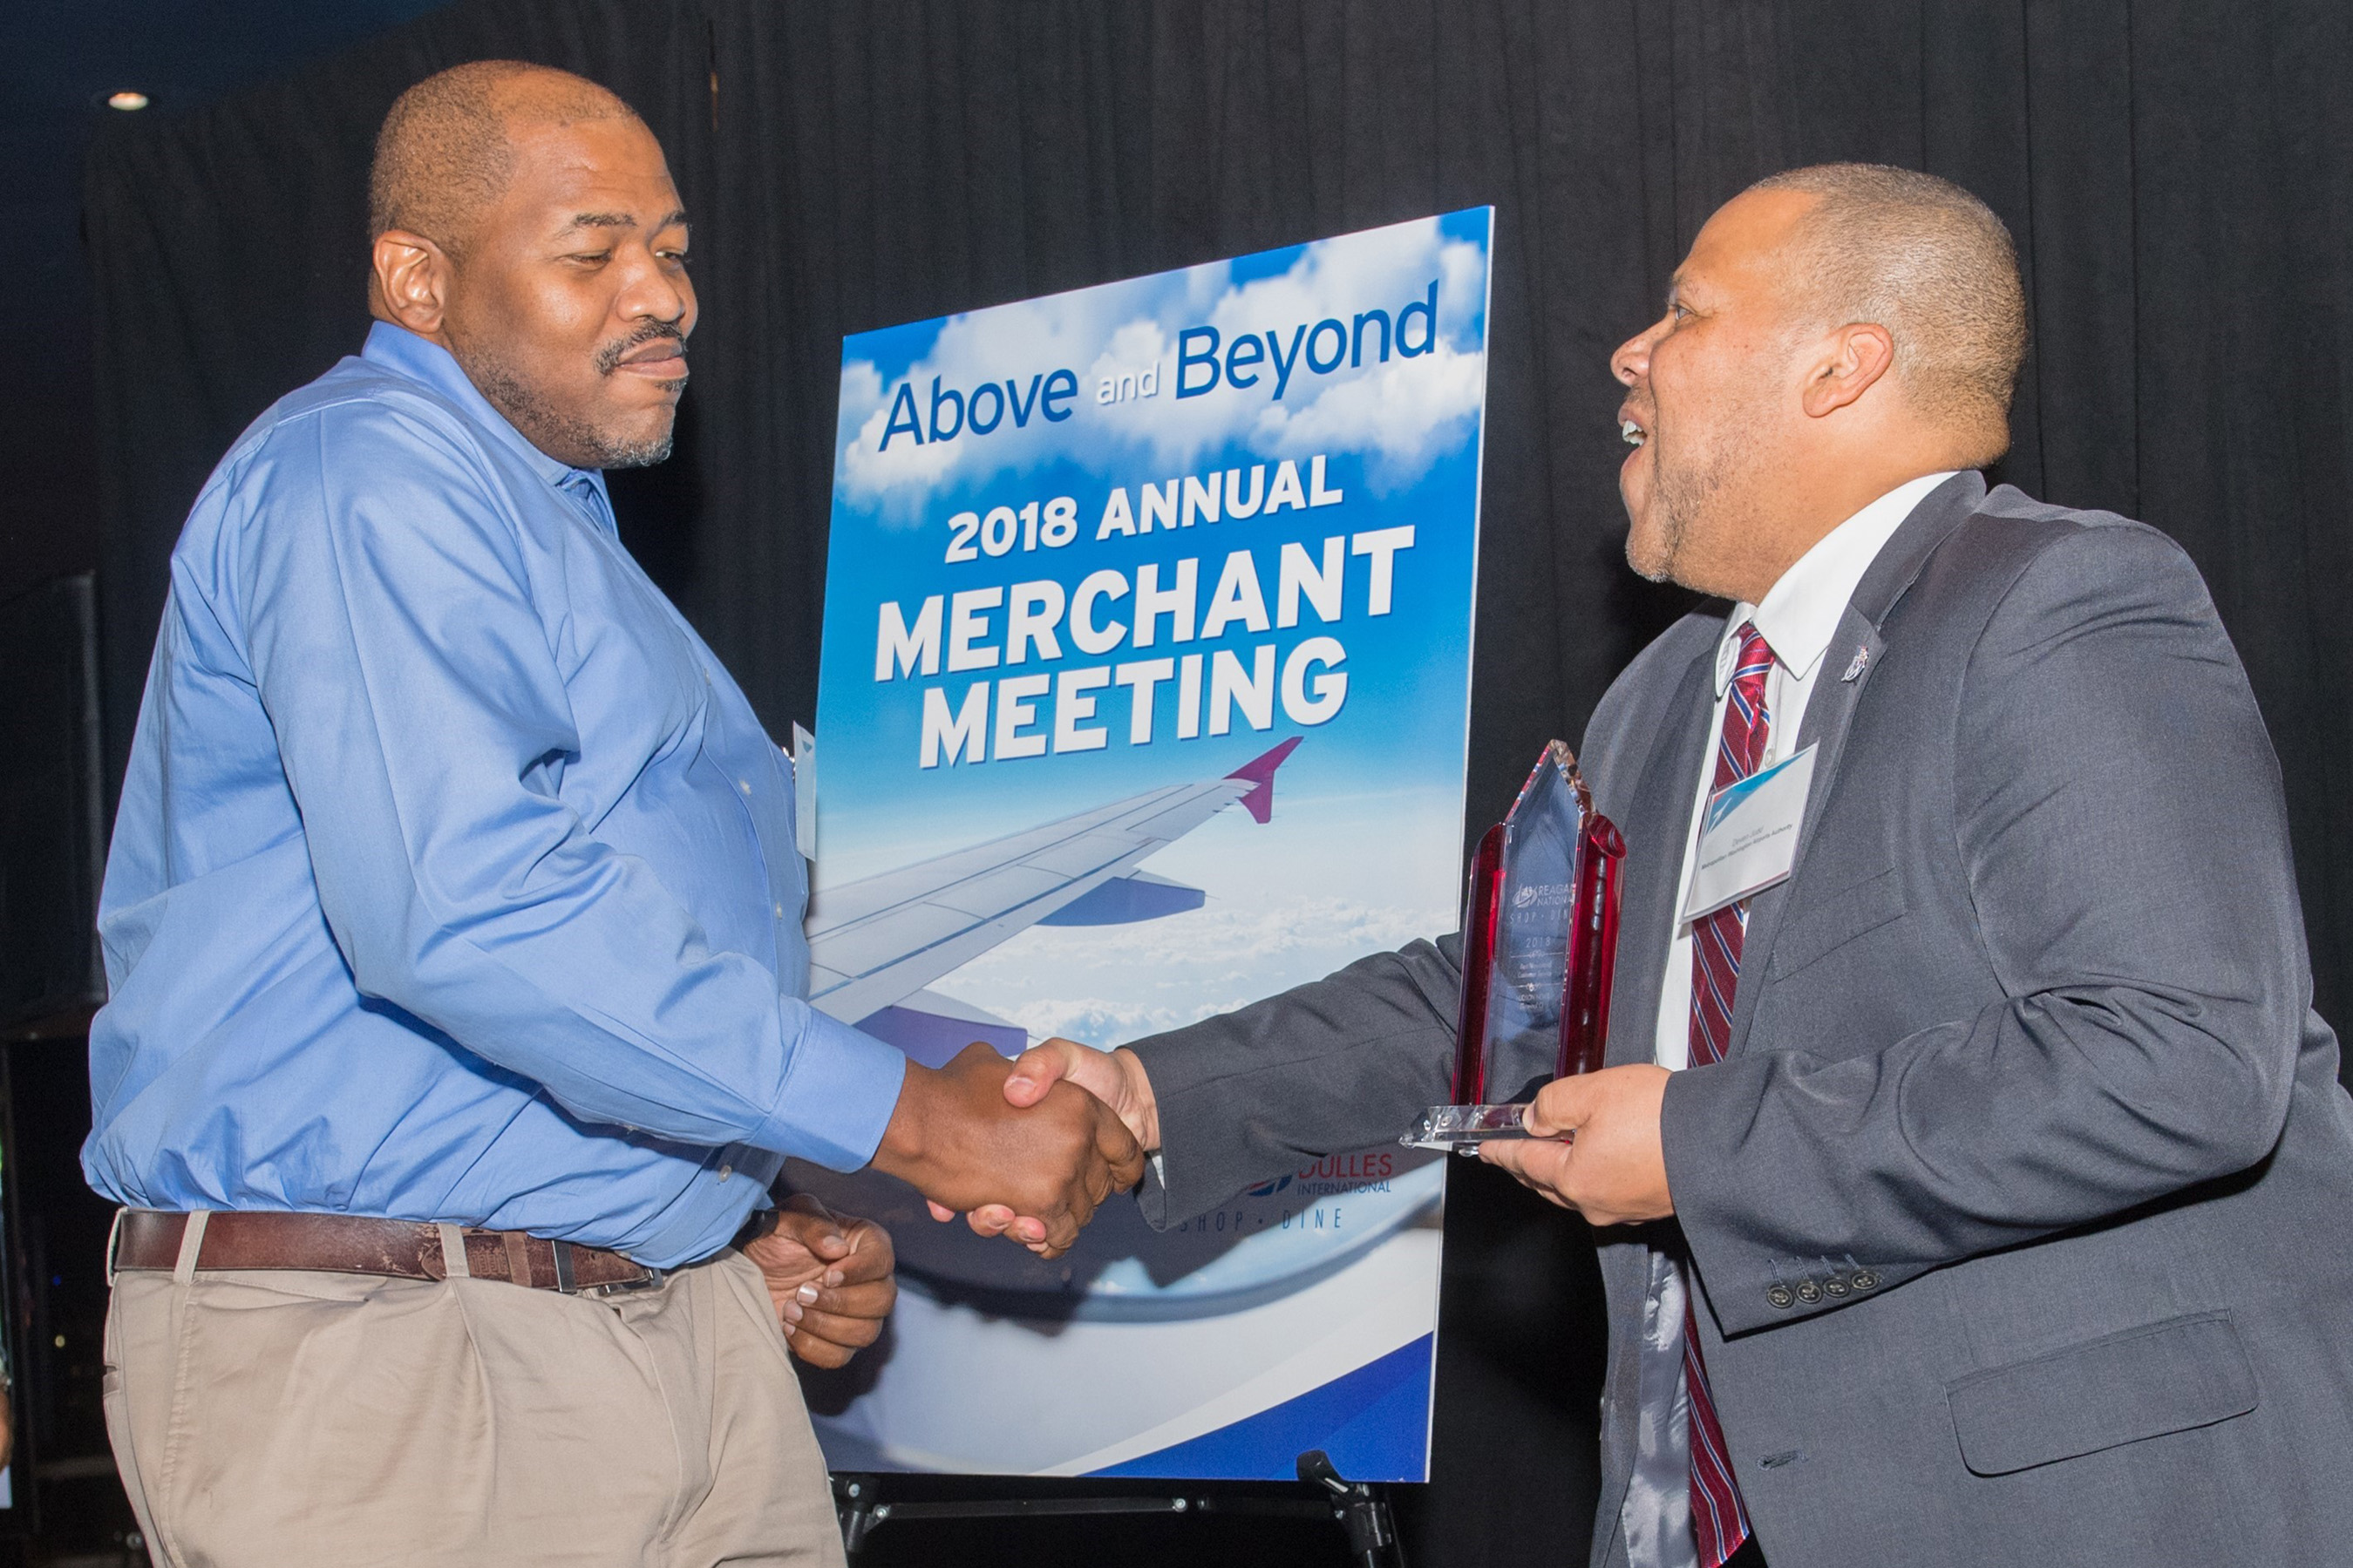 Reagan National Airport Best Newsstand Customer Service winner Hudson News’ General Manager Tony Tucker accepting award from Deven Judd, Director of Customer & Concessions Development with The Metropolitan Washington Airports Authority